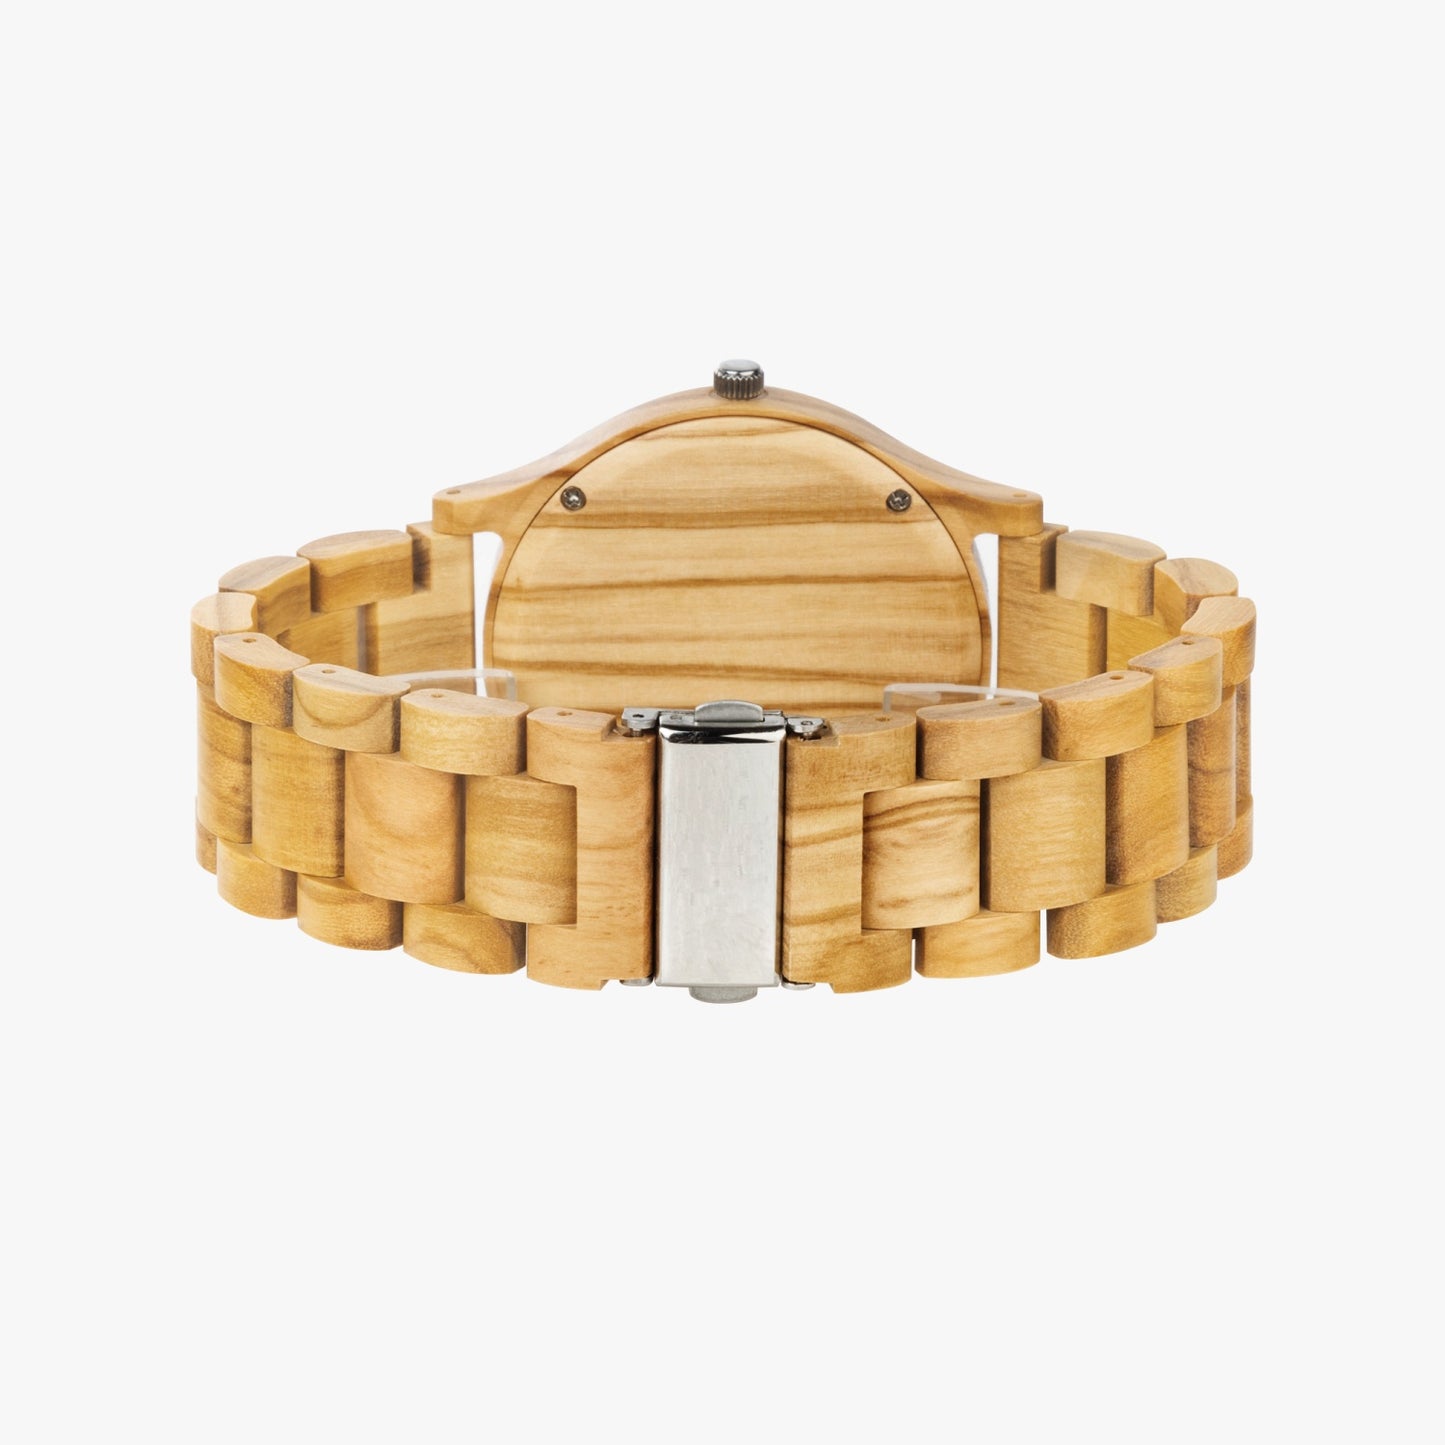 Natural wood watch "Linea"